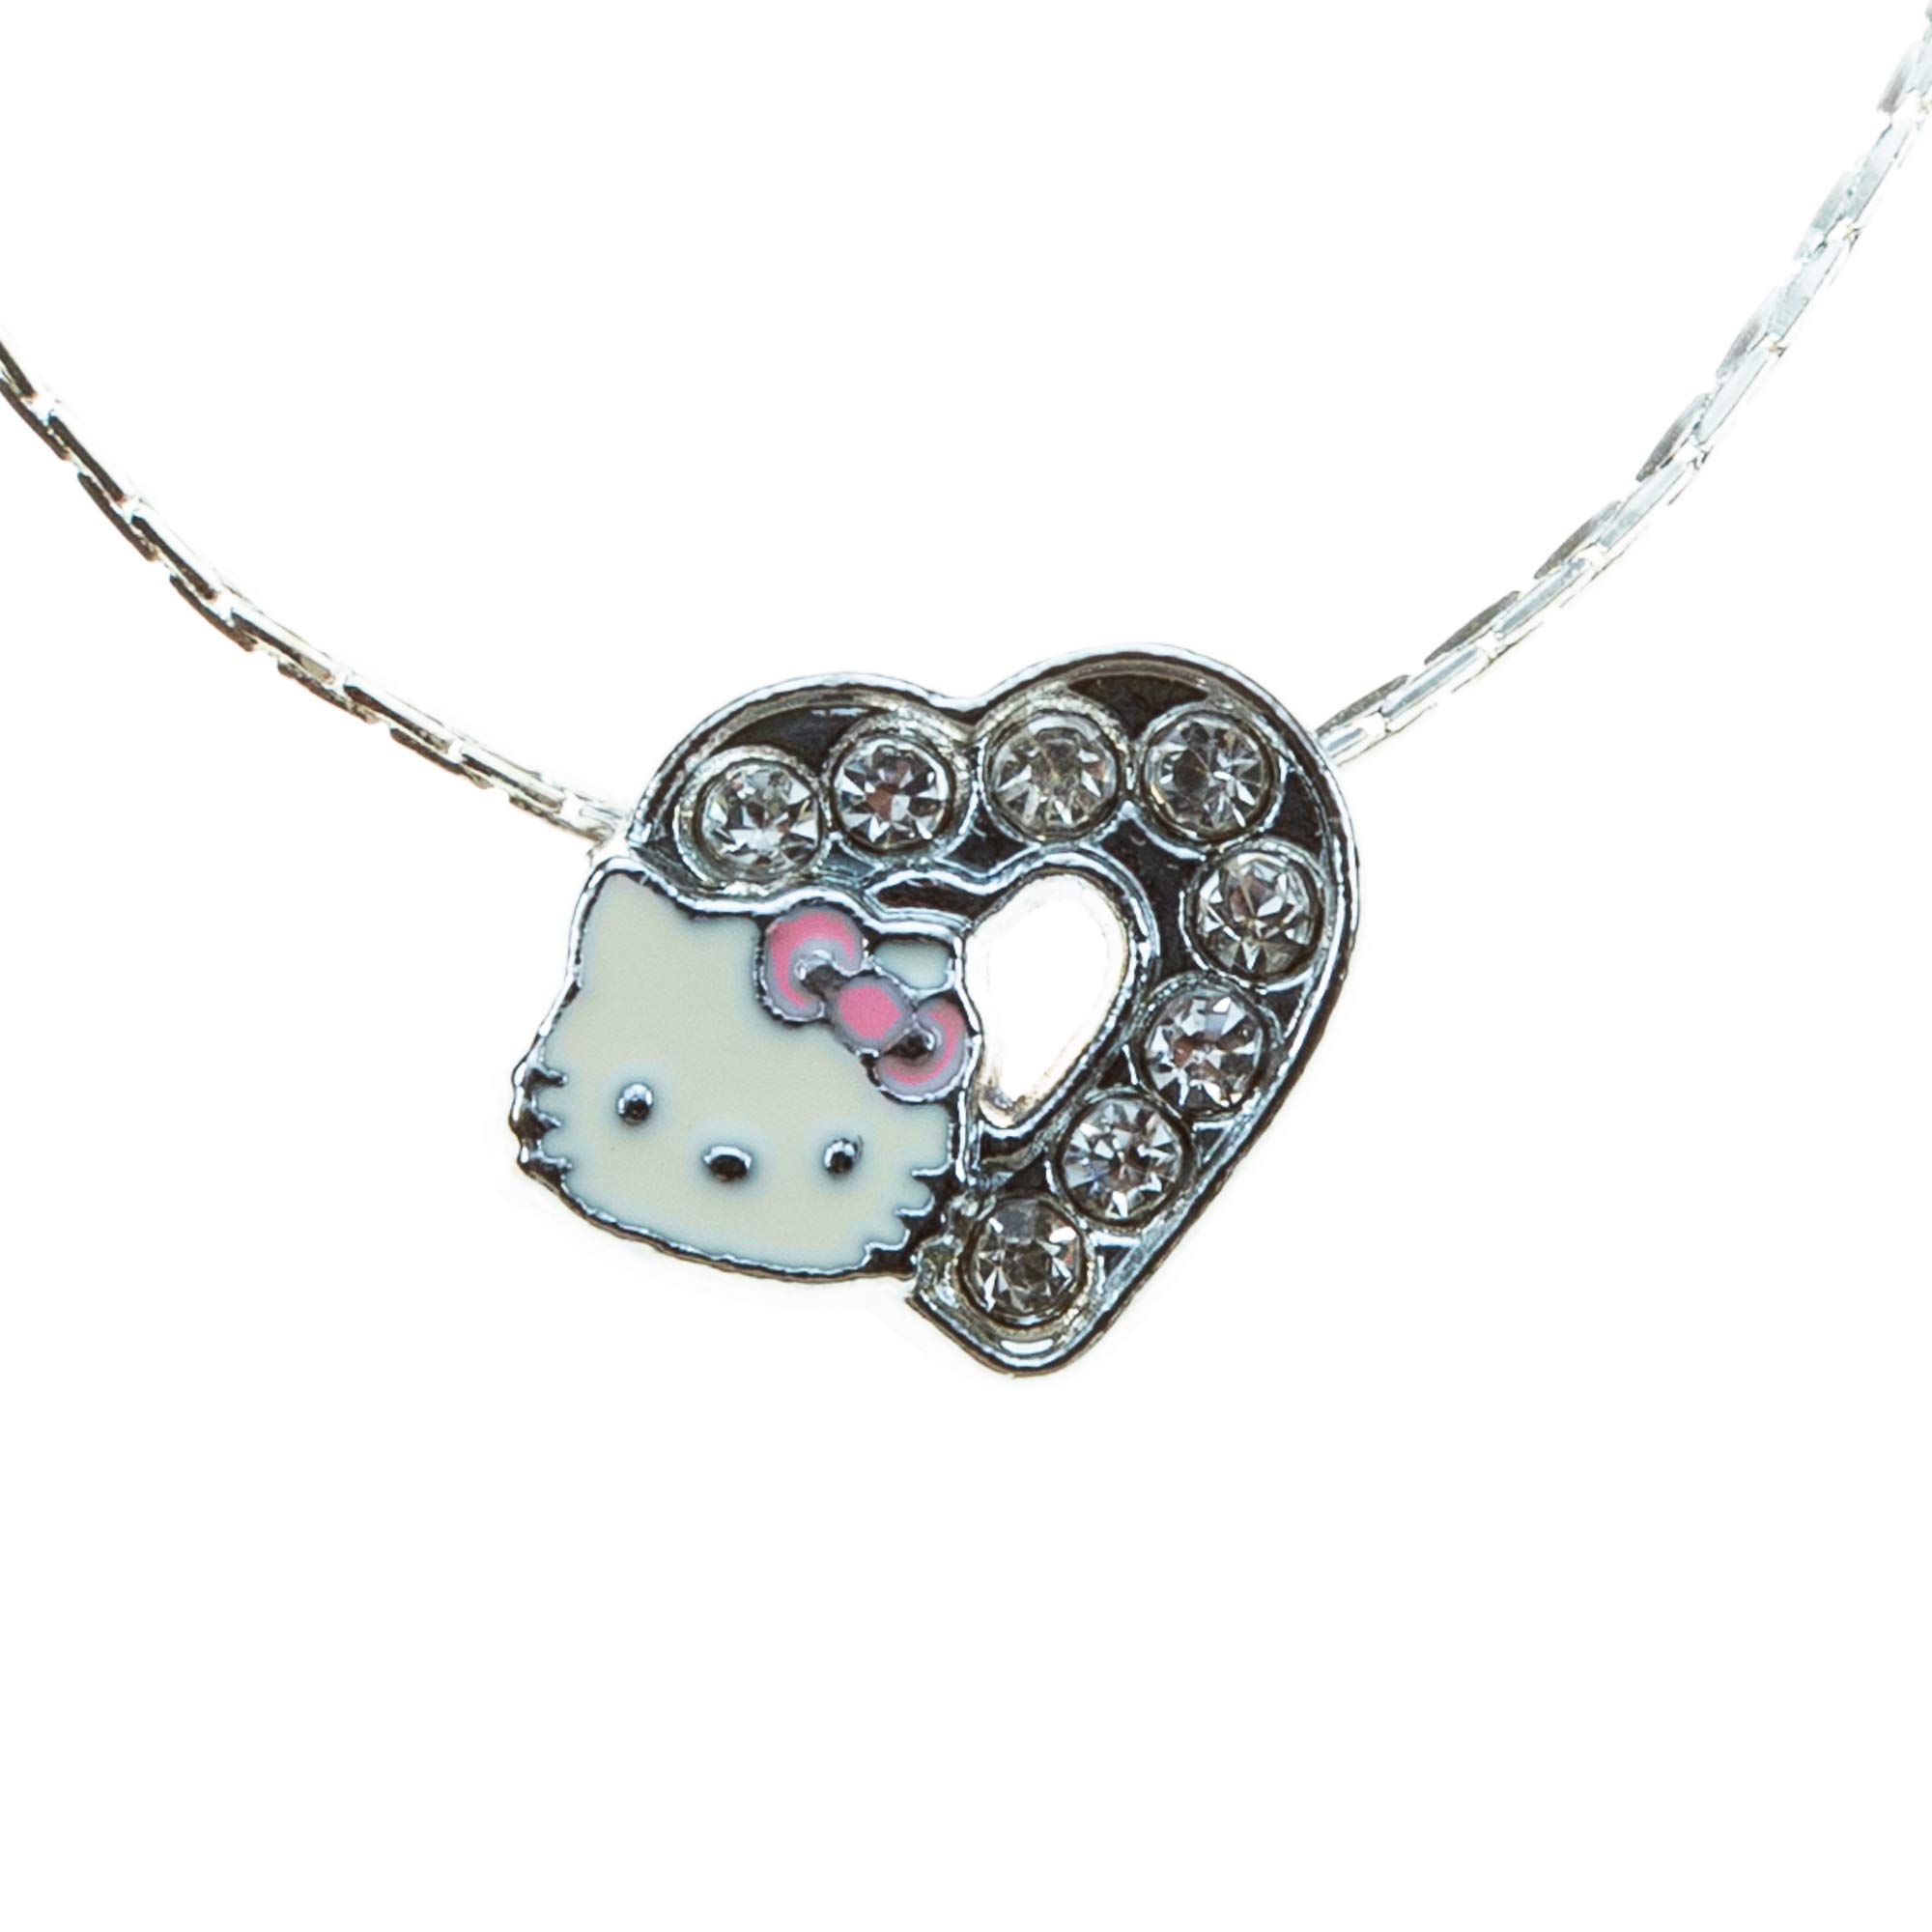 Hello Kitty Head Pink Bowknot and Large Heart Enamel on Metal Happy Birthday Holidays Valentine Merry Christmas Gifts. Chain (style varies) included.